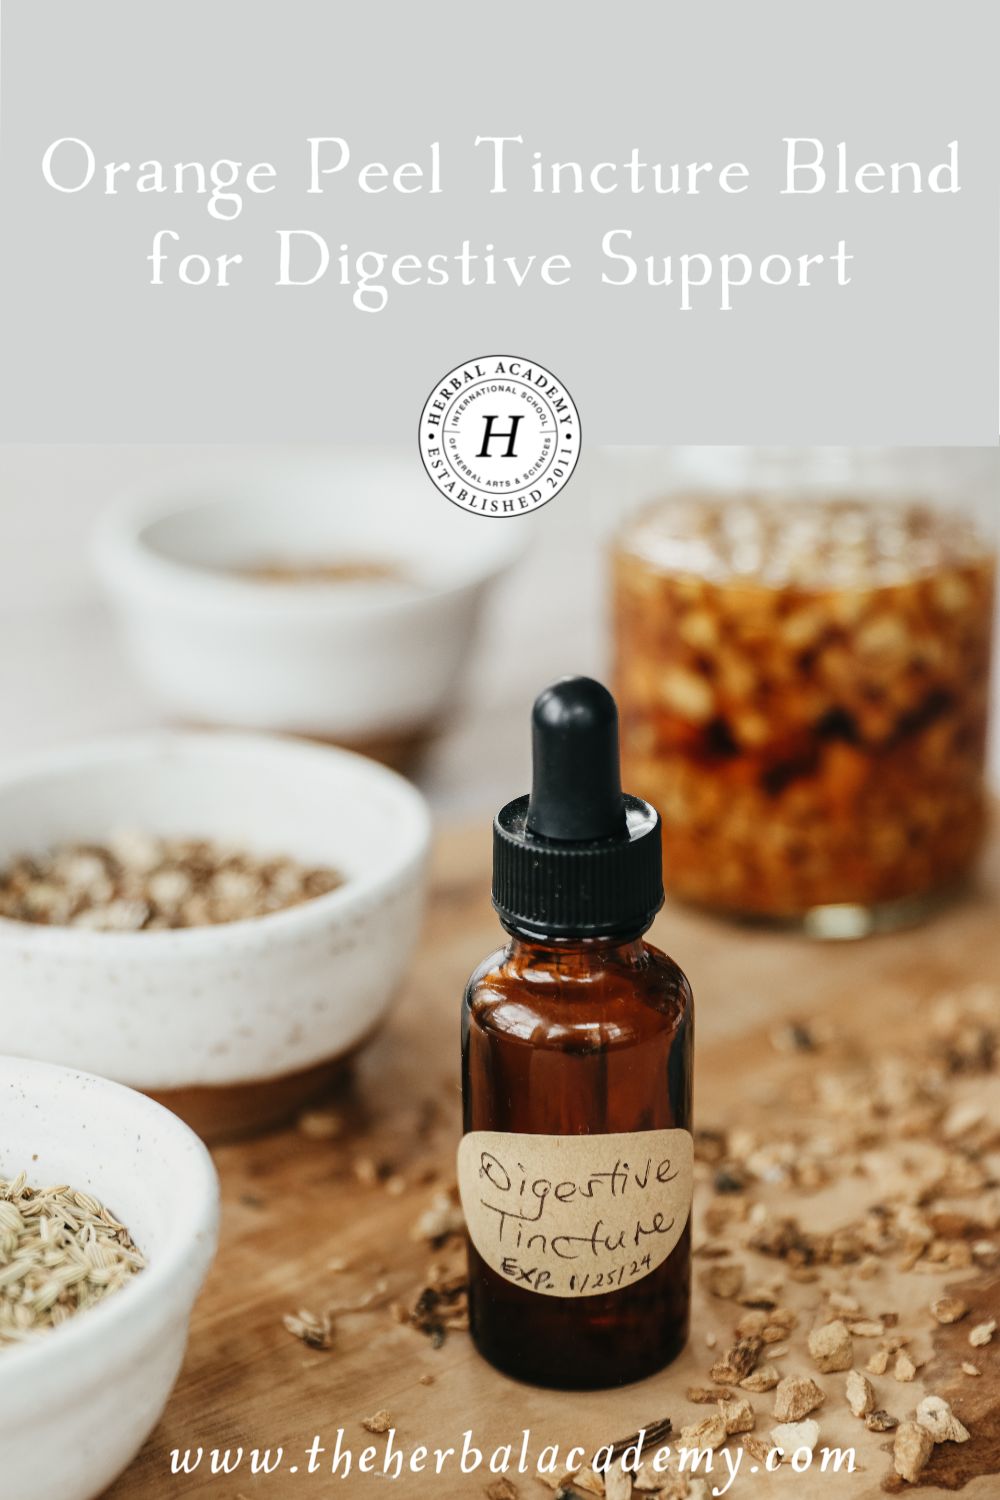 Orange Peel Tincture Blend for Digestive Support | Herbal Academy | Learn how to make an orange peel tincture at home with this simple herbal recipe to support digestive health.